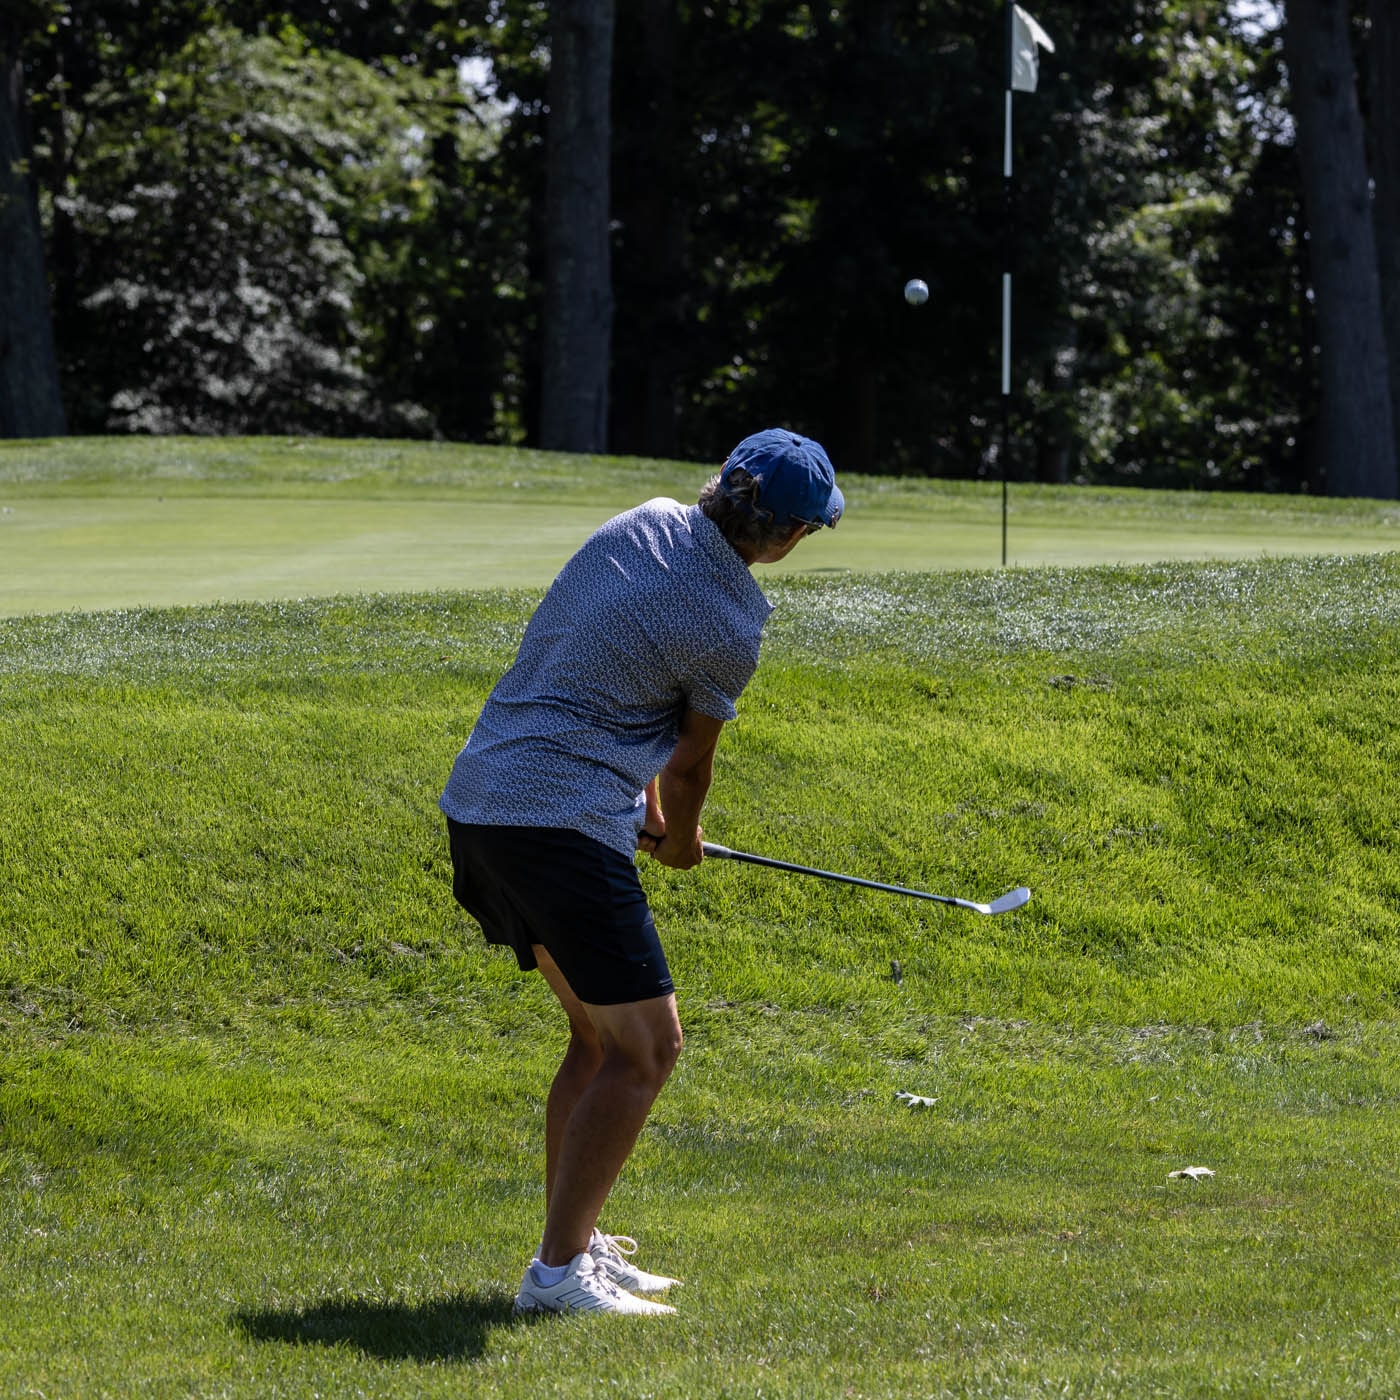 Country-Club-Of-New-Bedford FB-2023-Womens-FB-Gallery August-2023-Country-Club-Of-New-Bedford-FB-2023-Womens-FB-Gallery August-2023-Womens-FB-Gallery-Tuesday-Photos-Image-28